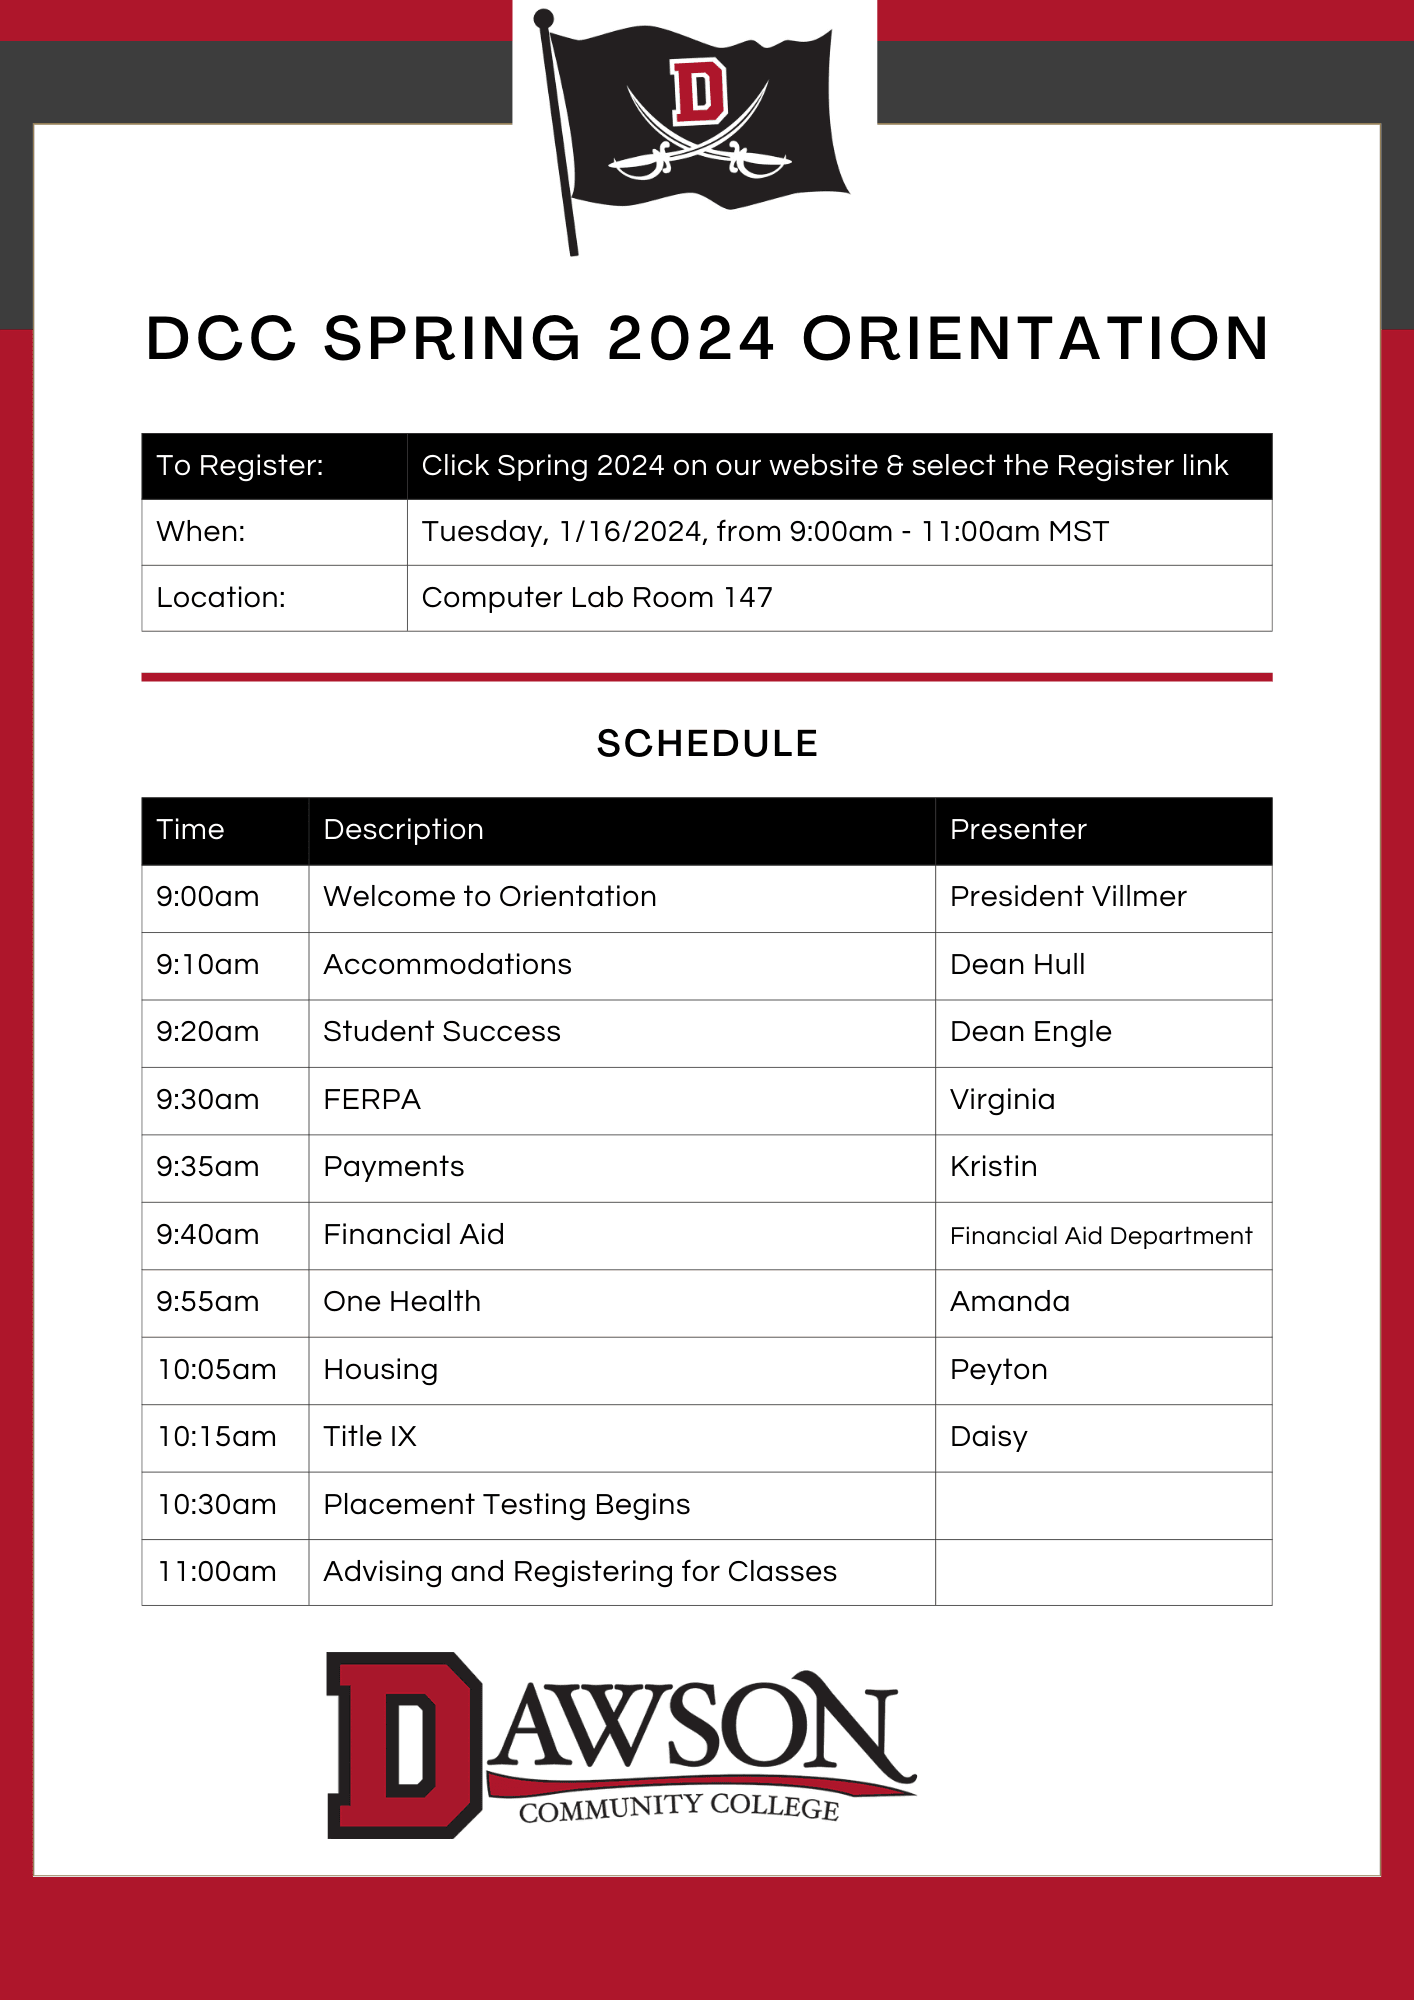 Spring 2024 Orientation on January 16th